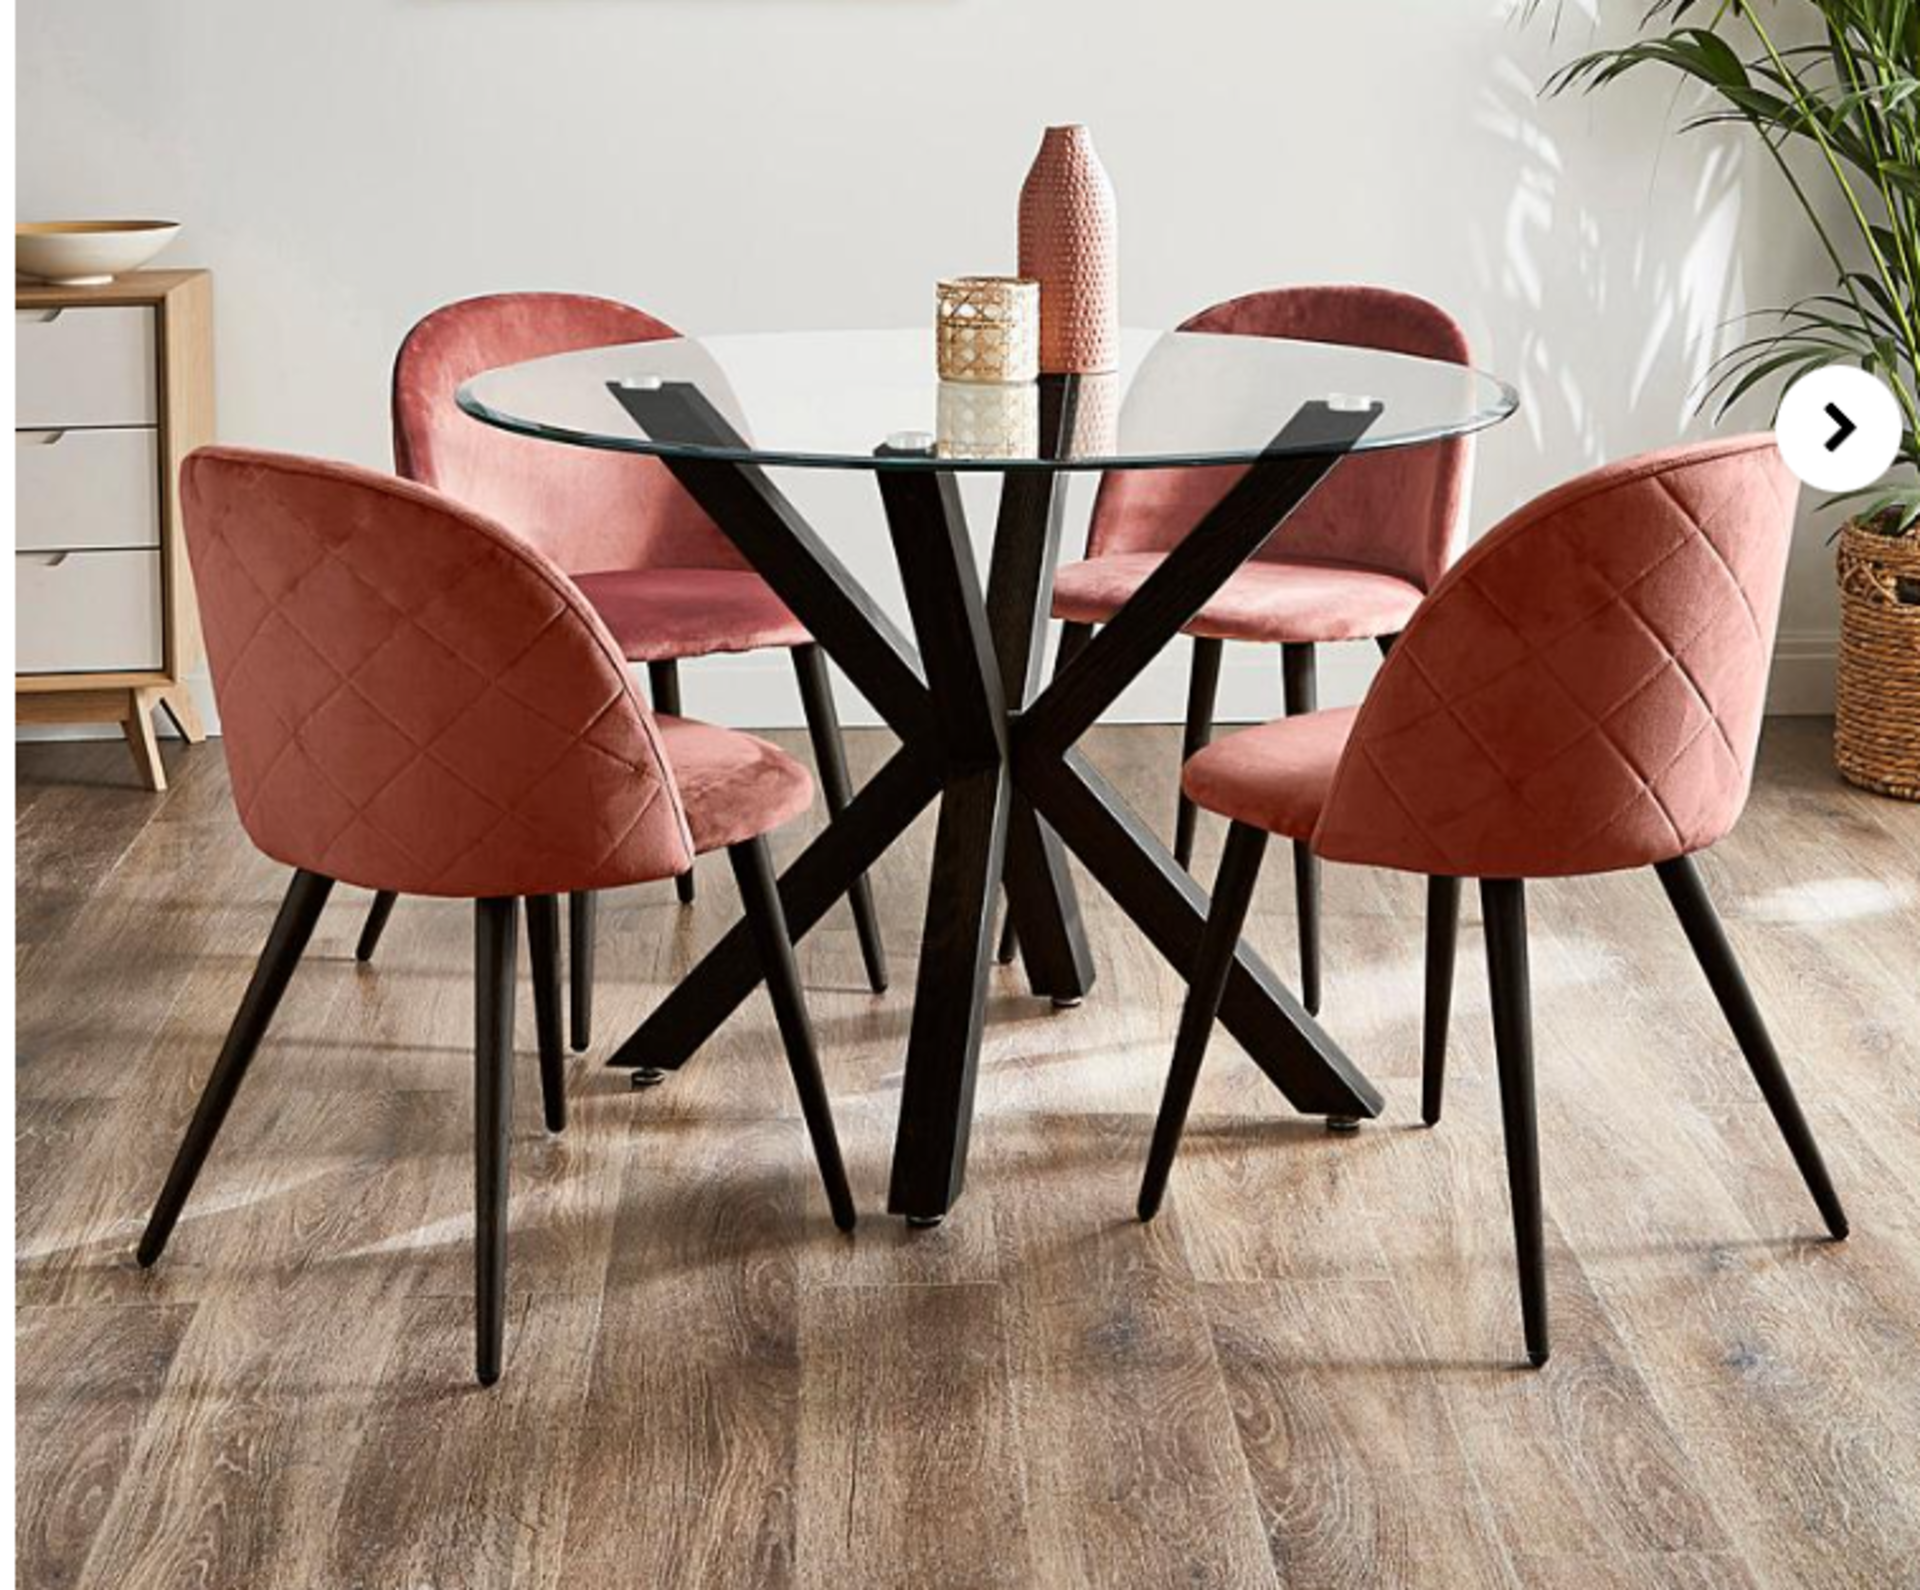 Bodie Dining Table. - ER20. RRP £239.00. Uplift your dining space with the modern & stylish Bodie